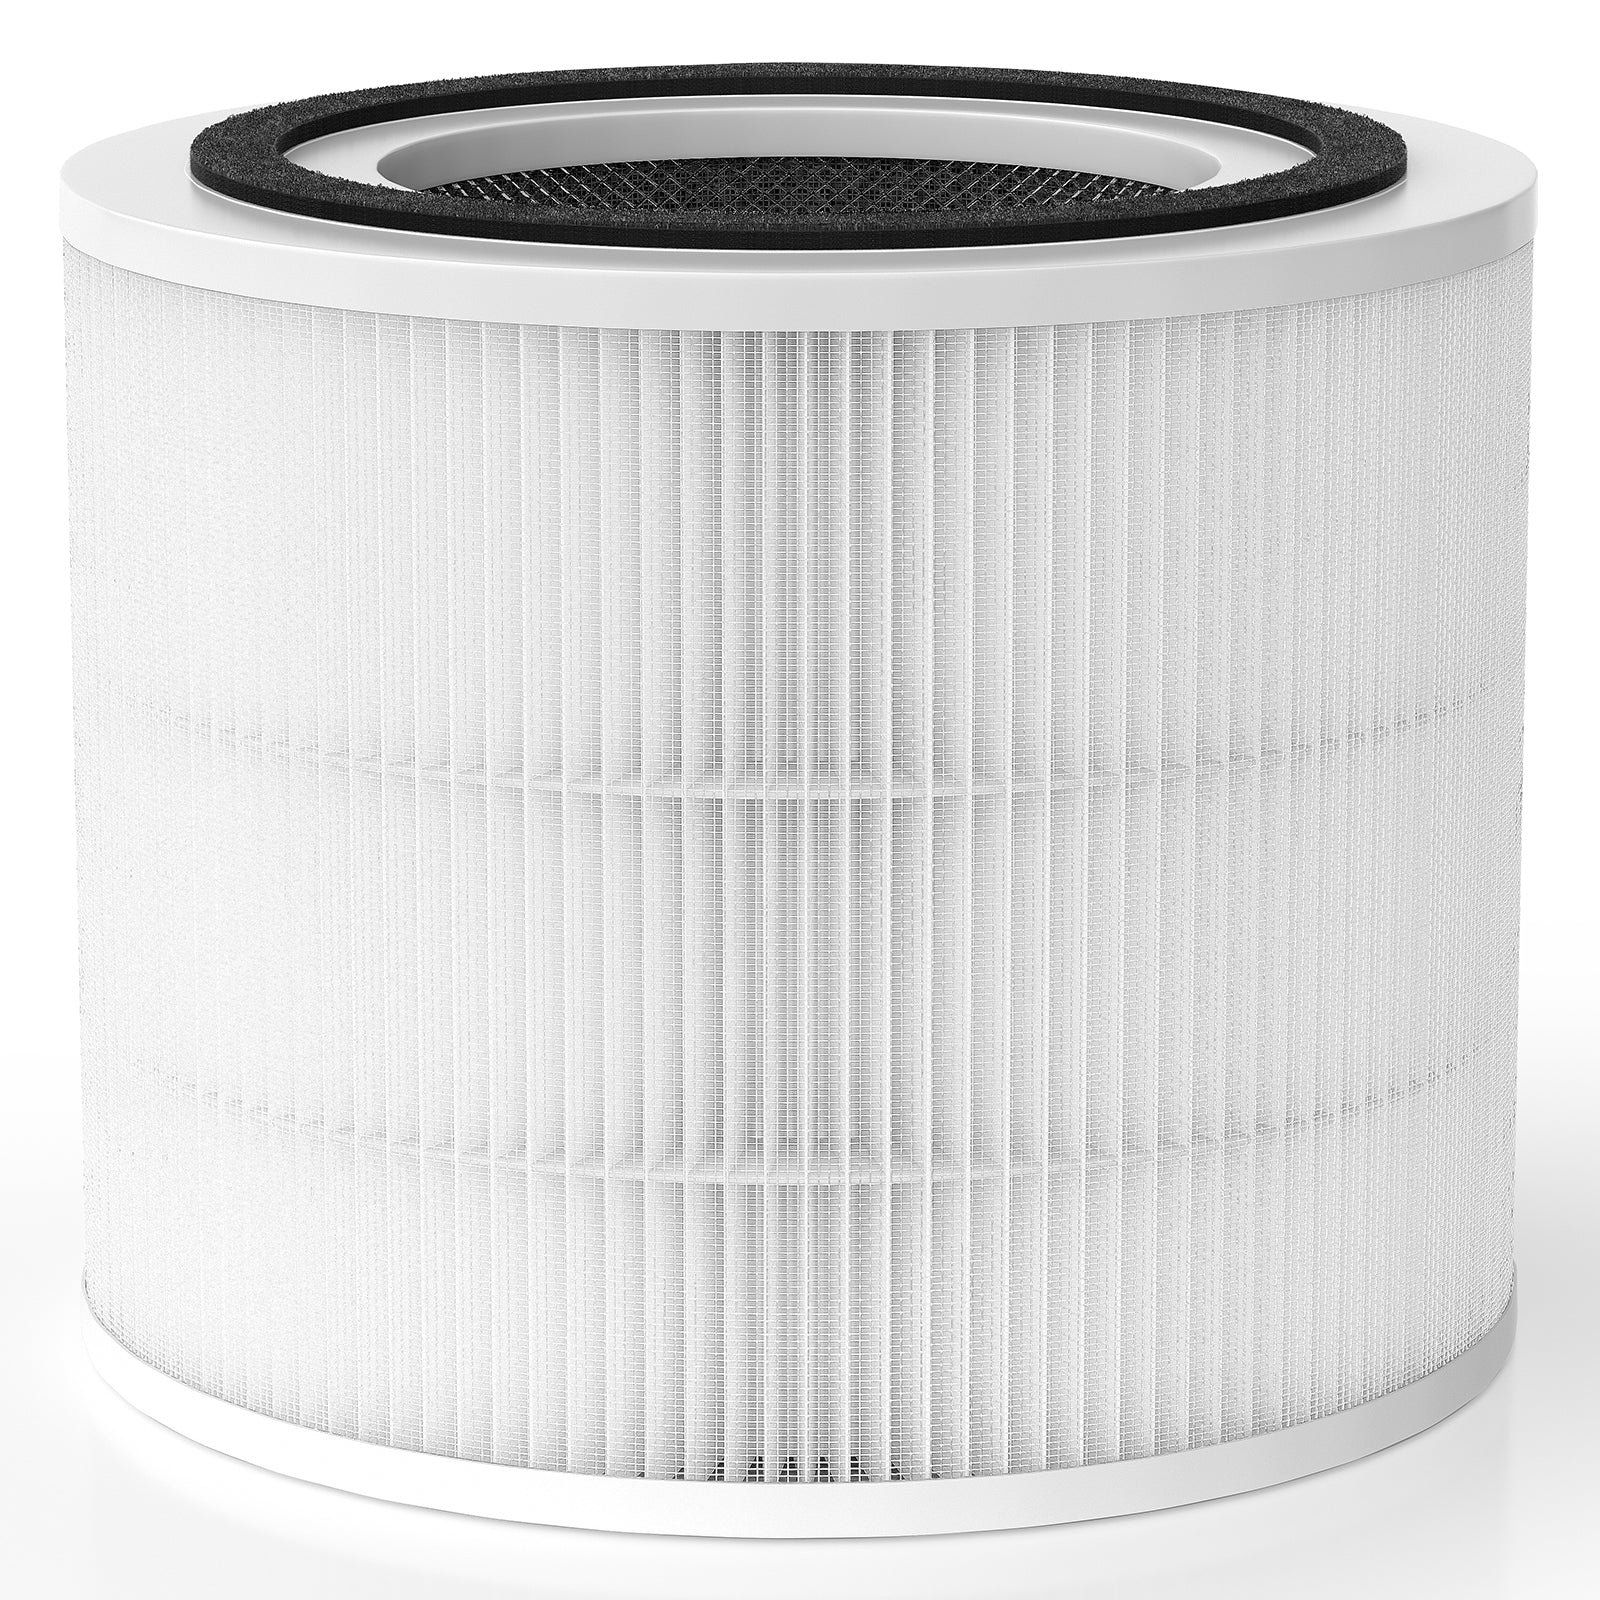 Leemone Ture HEPA Replacement Filter for Core 300 & 300S, 1 pcs